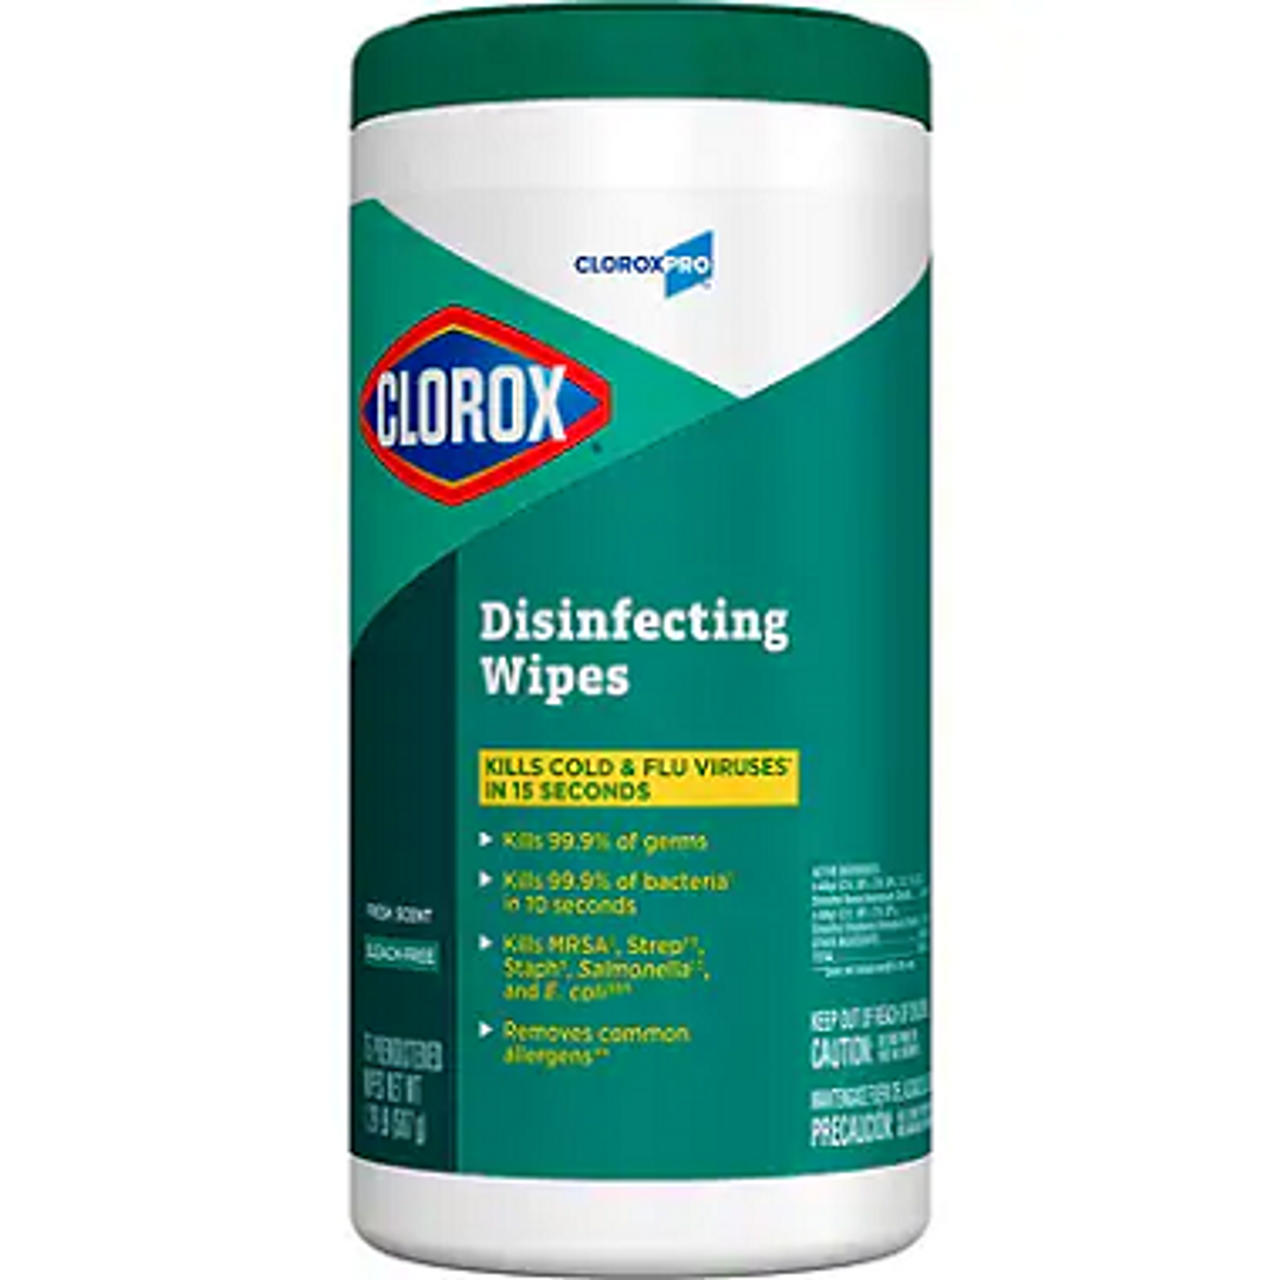 Clorox Disinfecting Institutional Wipes 2 Pack